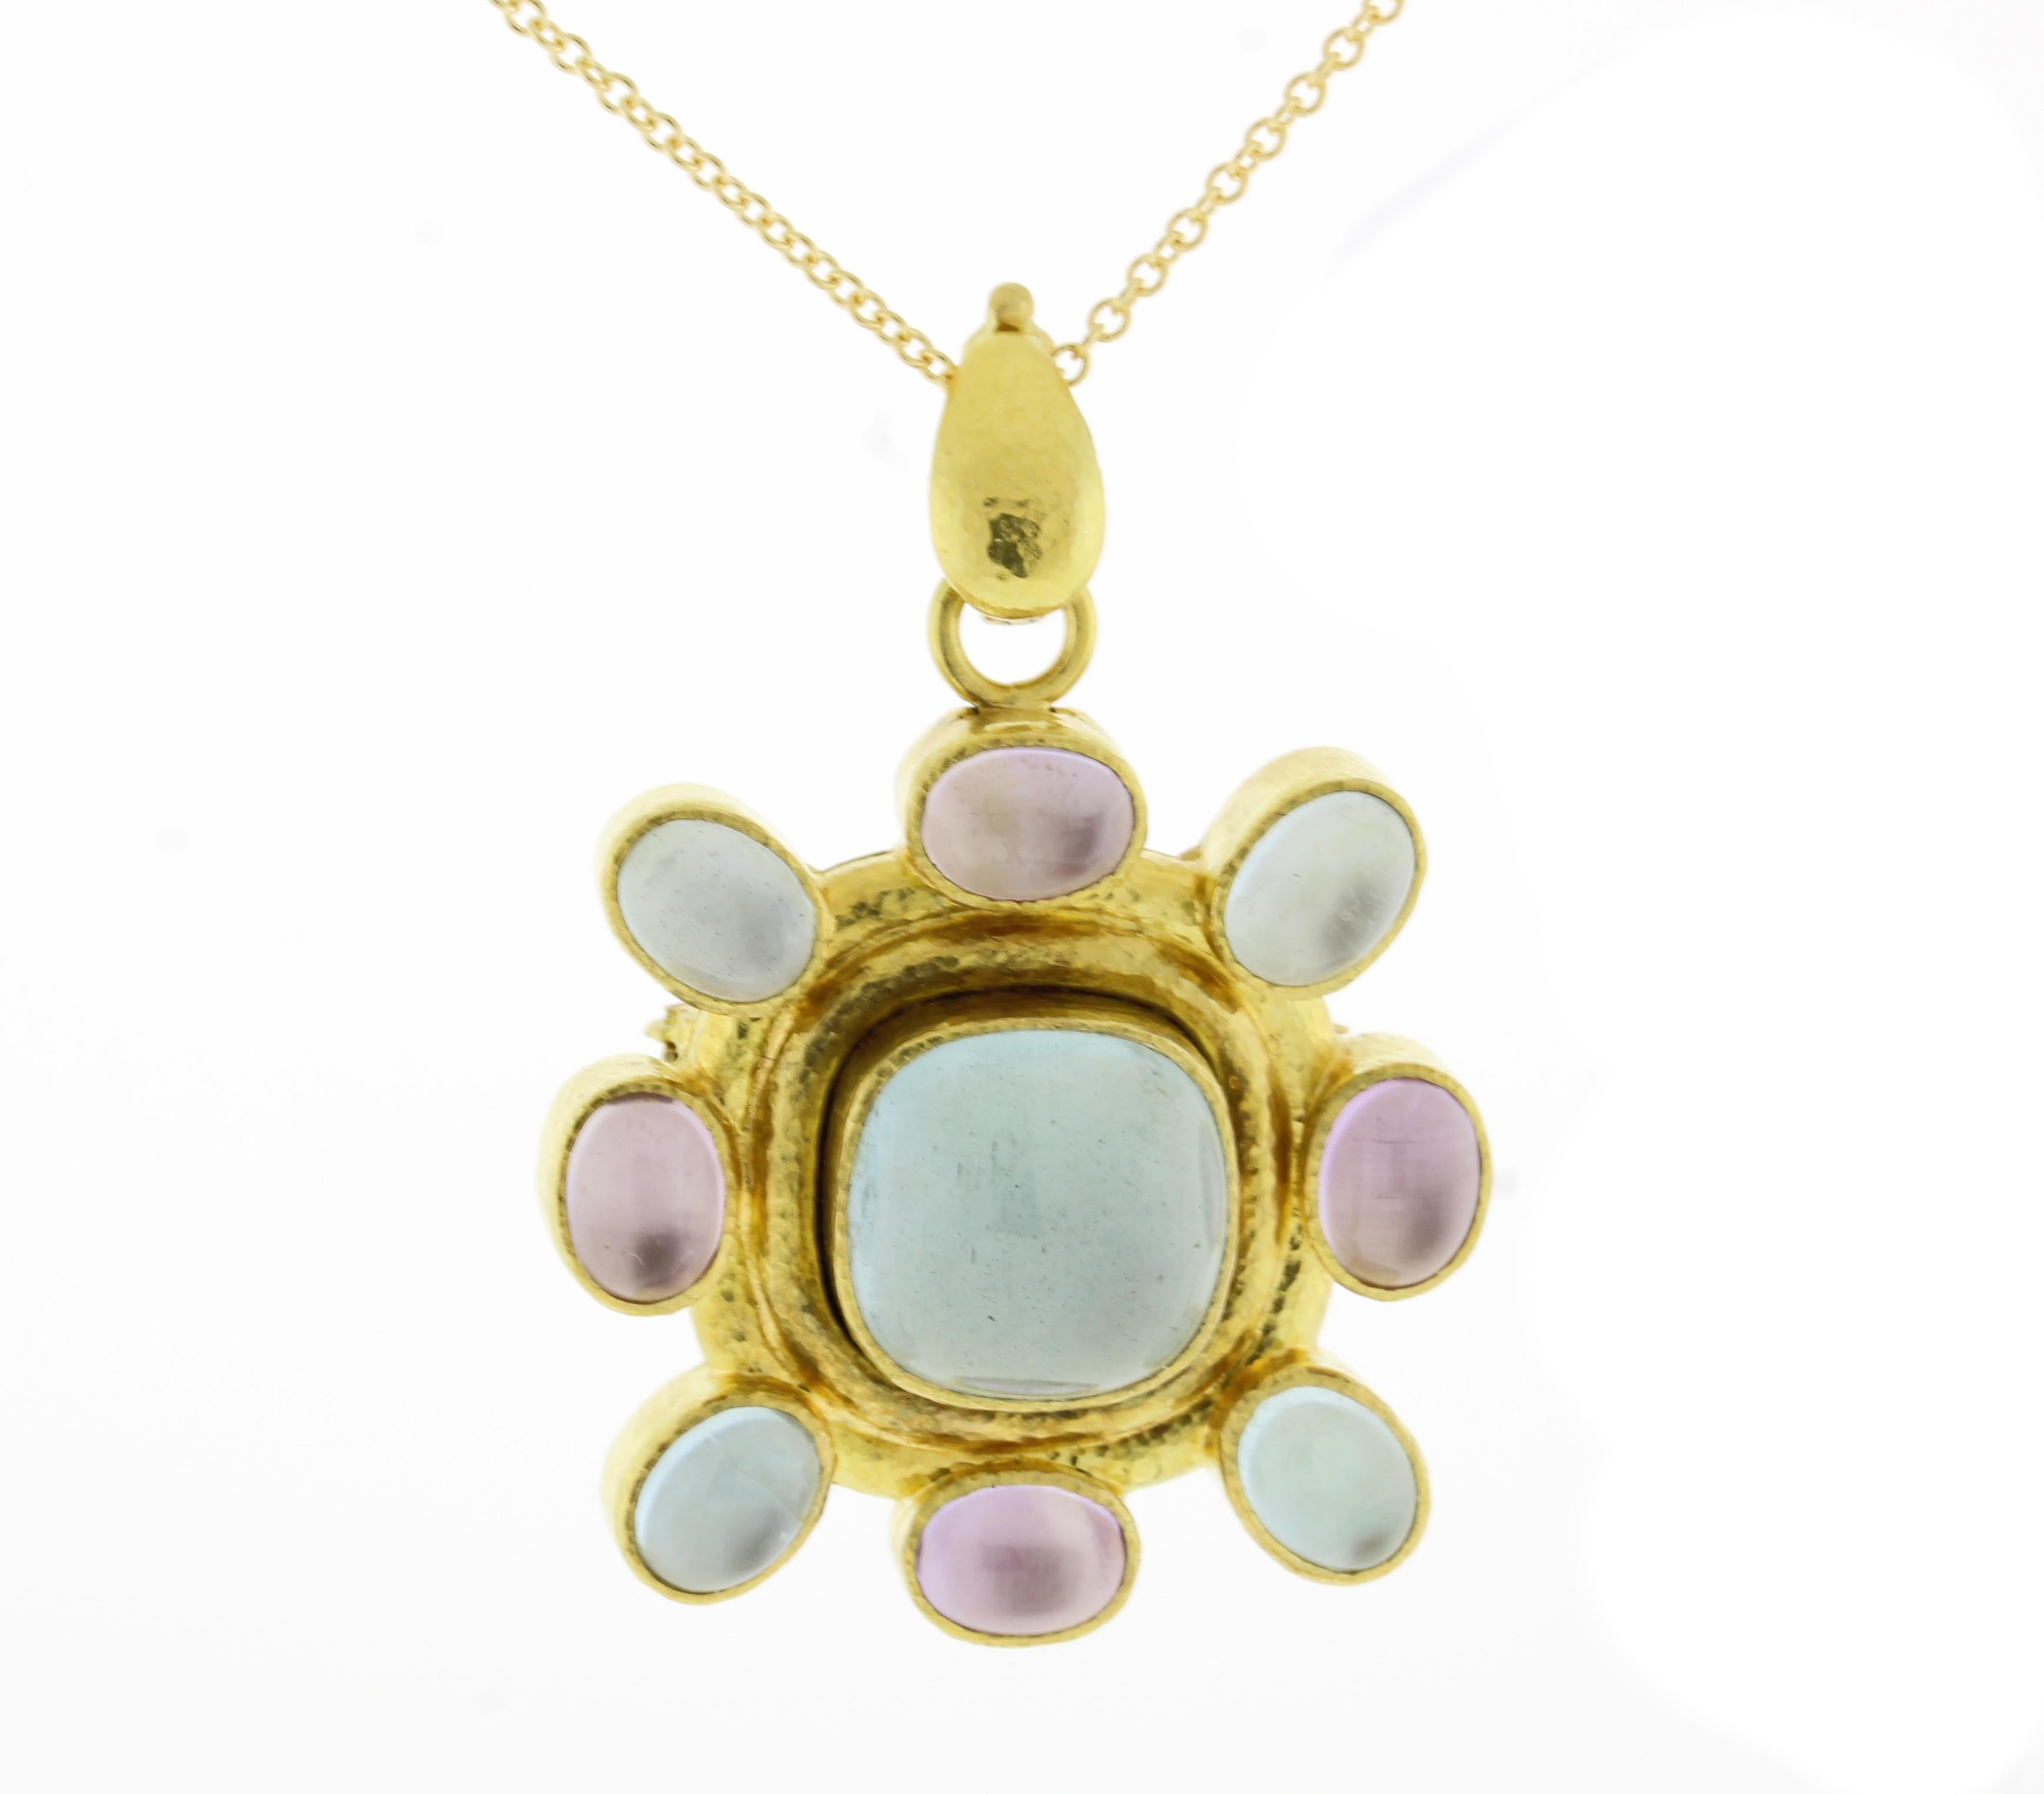 From Elizabeth Locke, this 19kt gold brooch/pendant has 1 large center cabochon aquamarine with 8 smaller cabochons, 4 aquamarines and 4 amethysts.  All stones are backed with mother of pearl.
• Metal:19kt Yellow Gold	
• Circa: 21st Century
•